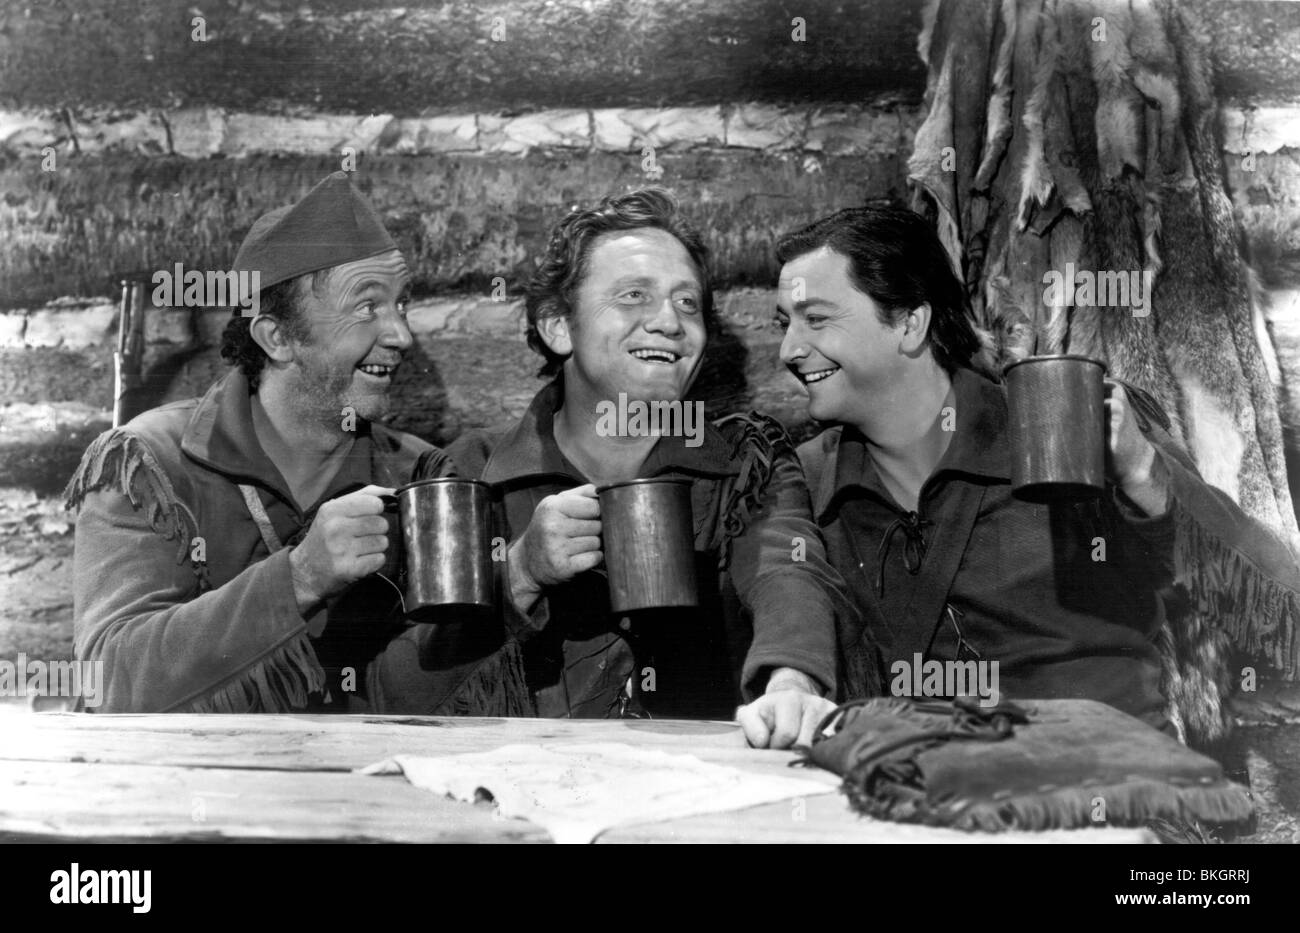 NORTHWEST PASSAGE (1940) WALTER BRENNAN, SPENCER TRACY, ROBERT YOUNG NWP 001-01 Stock Photo